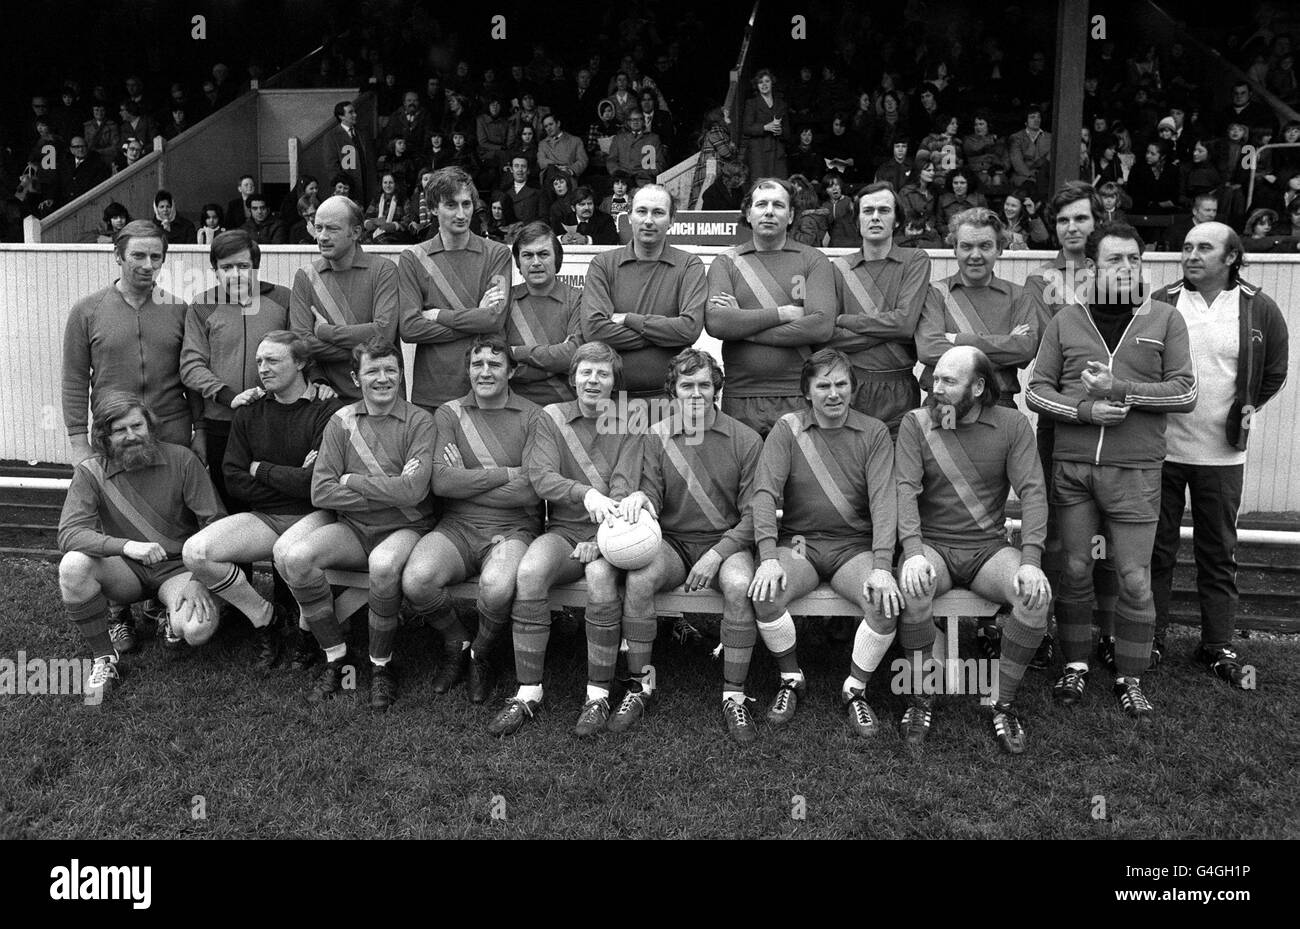 PA NEWS PHOTO 9/3/75 JONATHAN AITKEN (BACK ROW, FAR RIGHT SECOND FROM LAST, SLIGHTLY BLOCKED) STANDING WITH A TEAM OF MP'S WHO PLAYED A SHOWBUSINESS XI AT DULWICH HAMLET GROUND TO AID A CHARITY FOR THE HOMELESS, ST. GILES'S CENTRE CAMBERWELL, LONDON Stock Photo